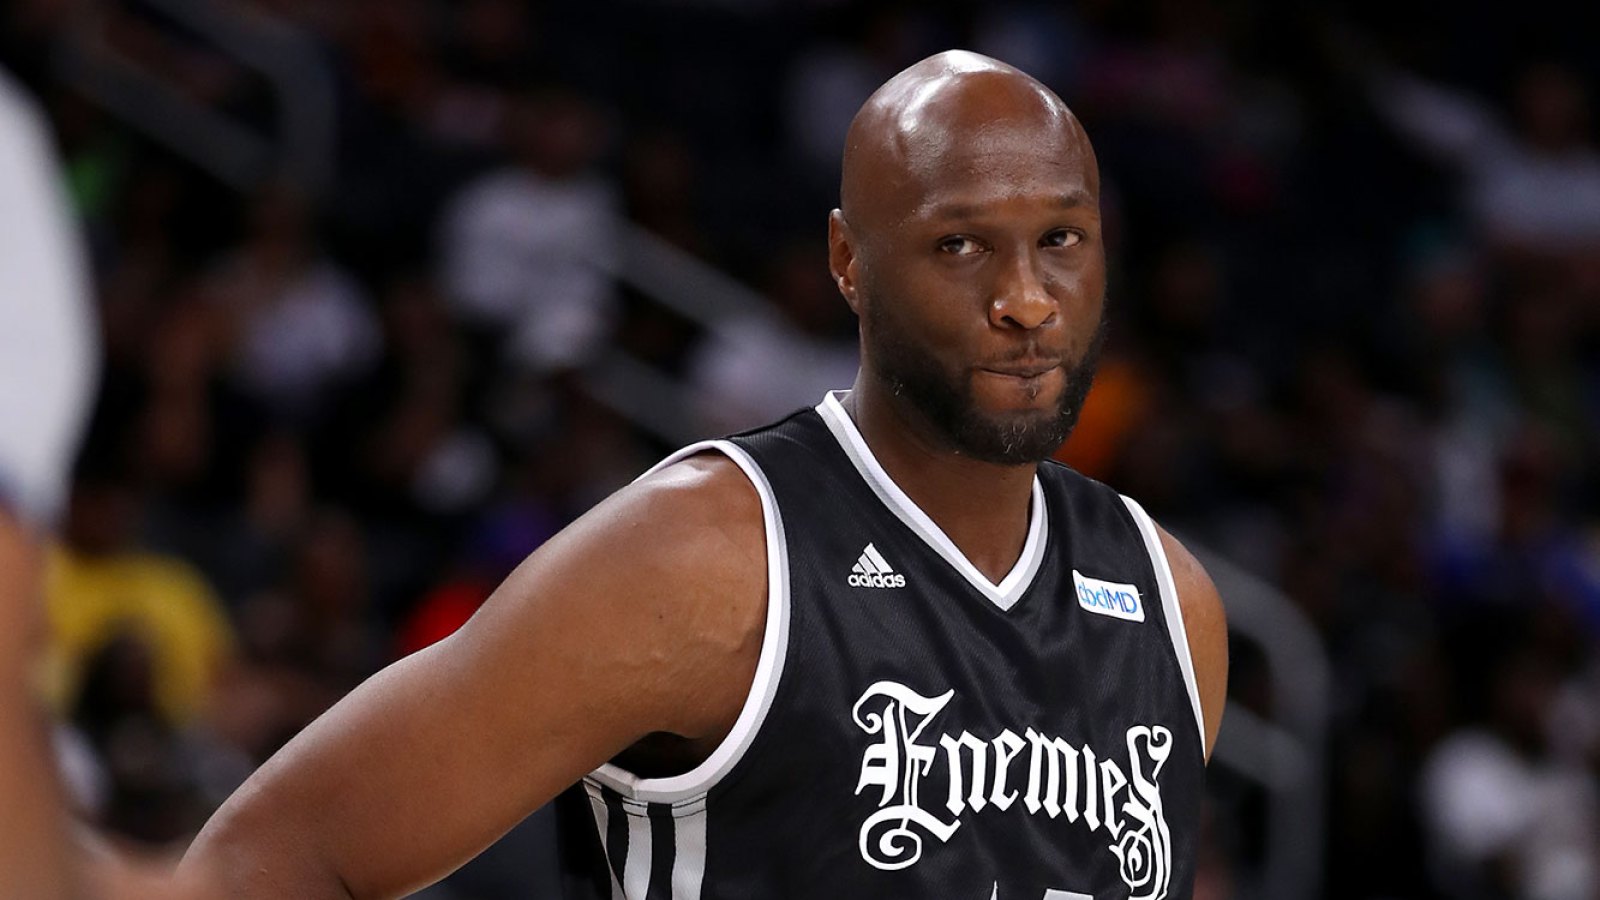 Lamar Odom Deactivated From BIG3